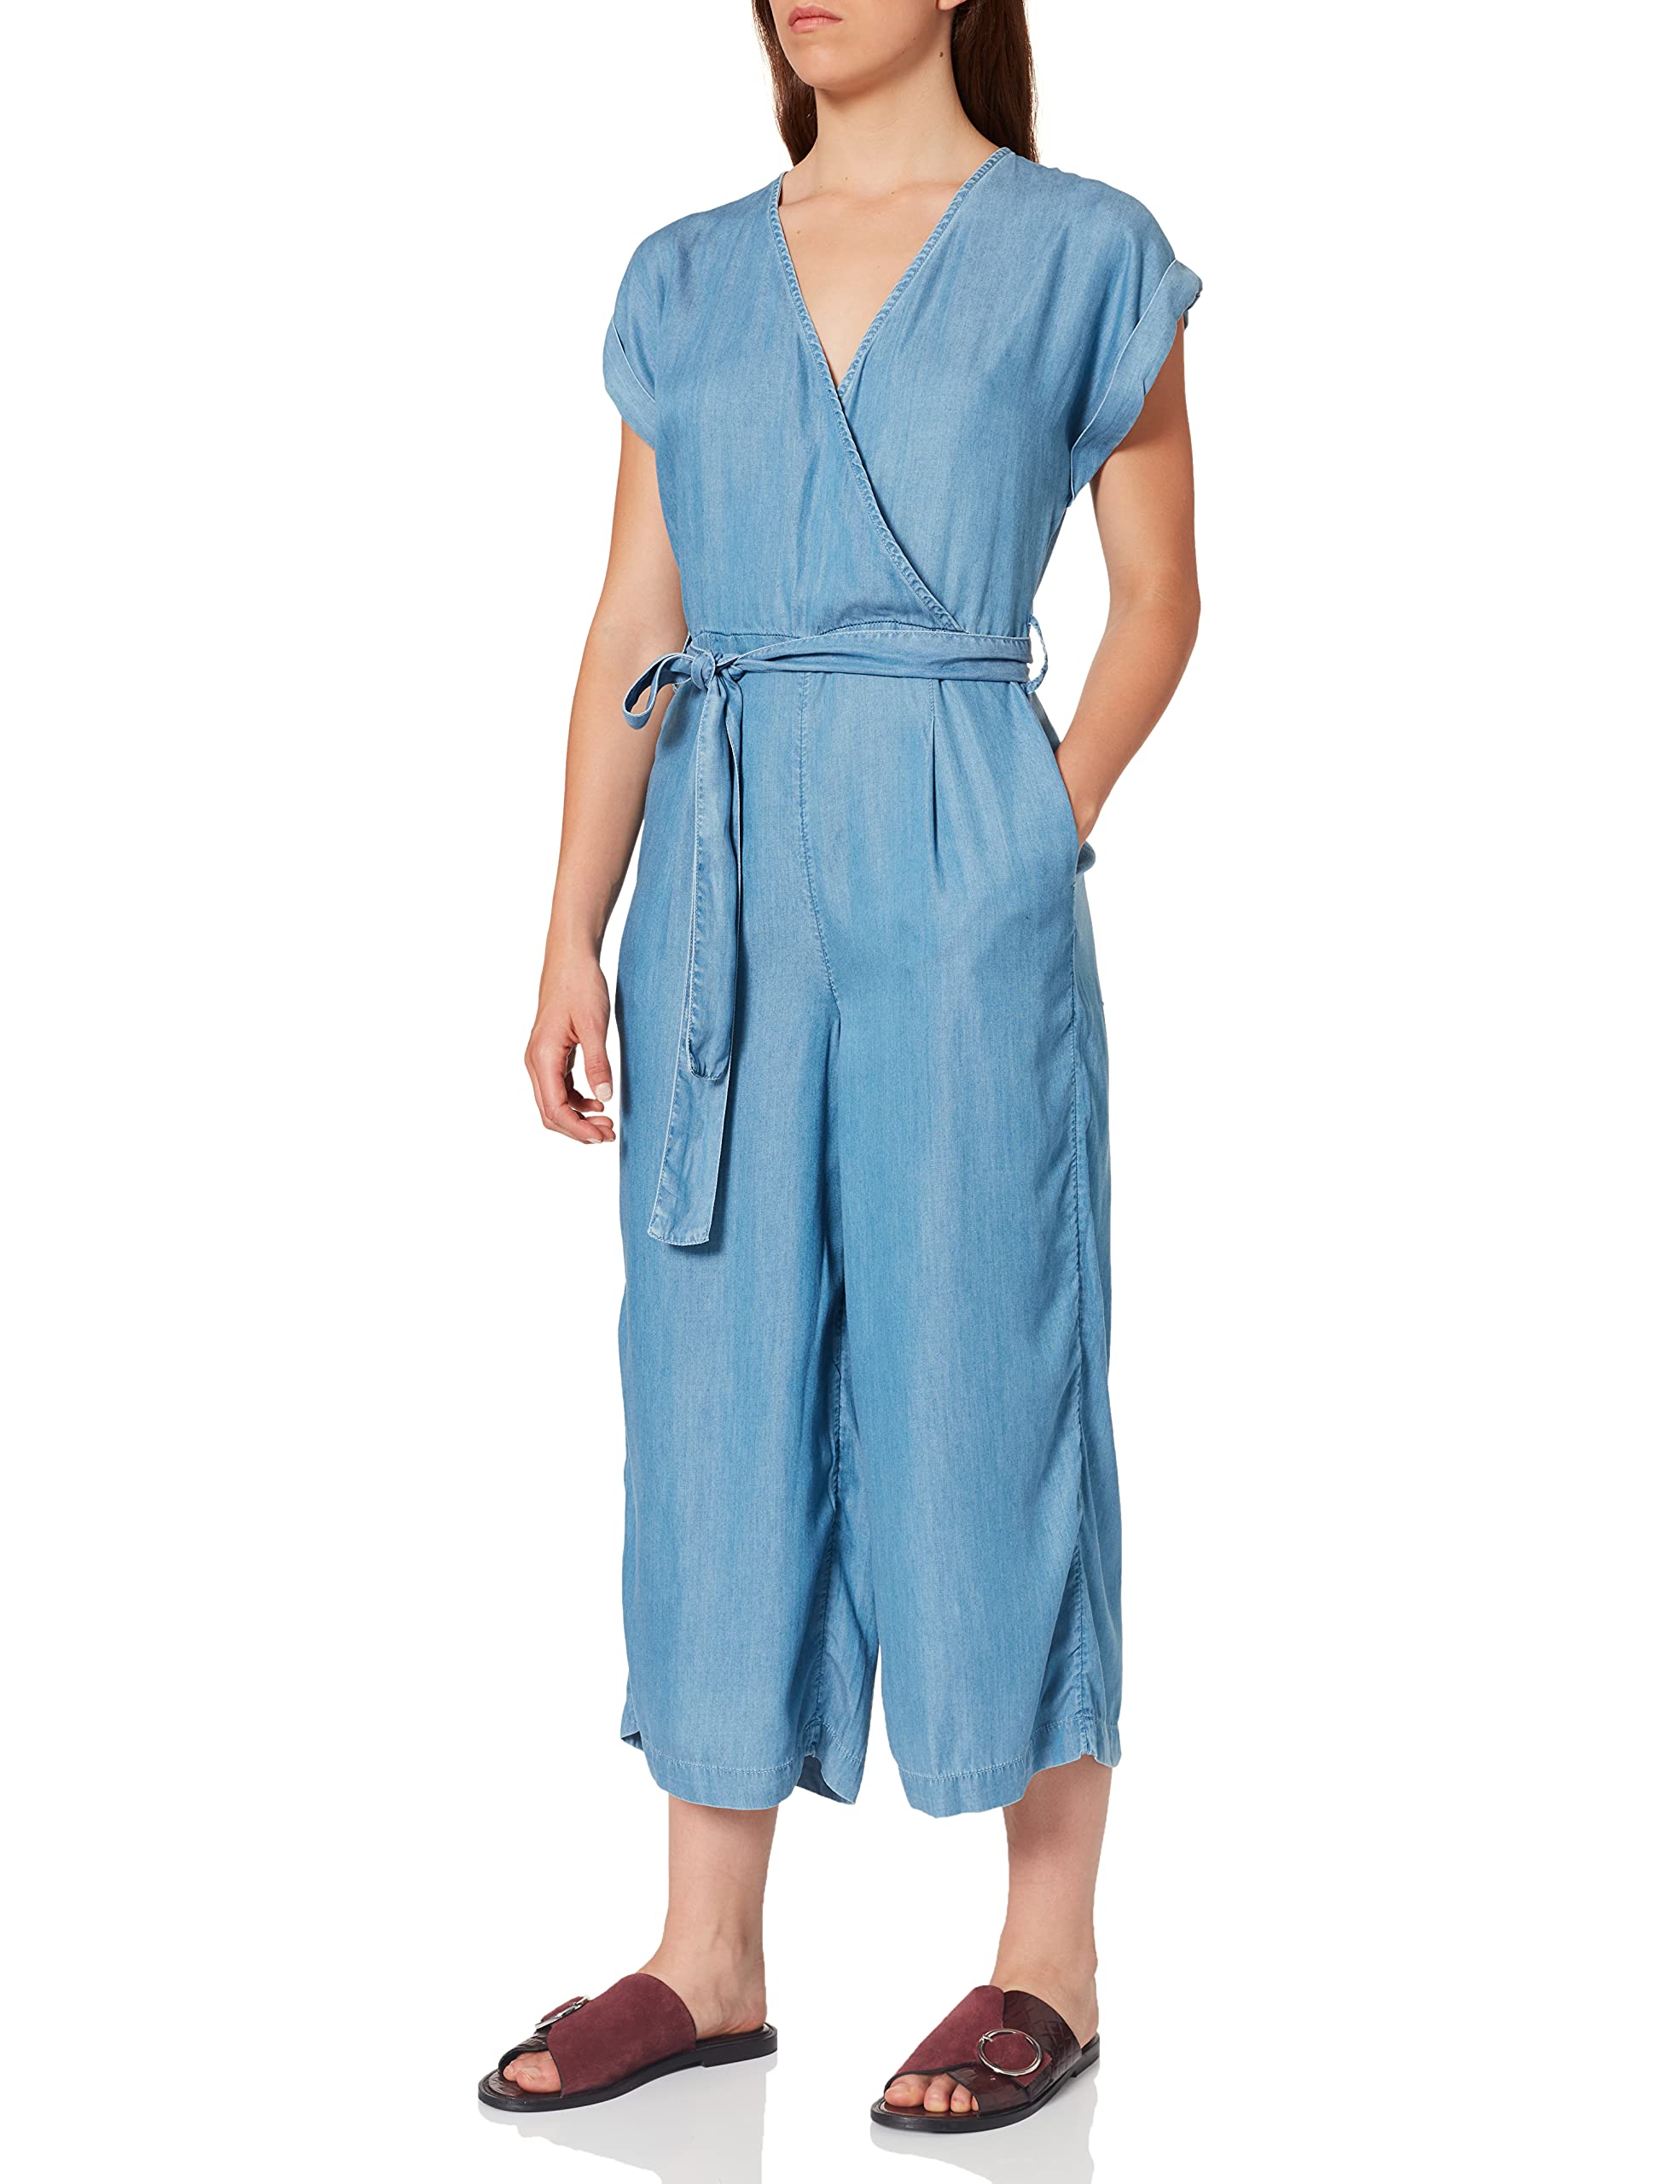 find. W17150l Jumpsuits, Chambray, 40